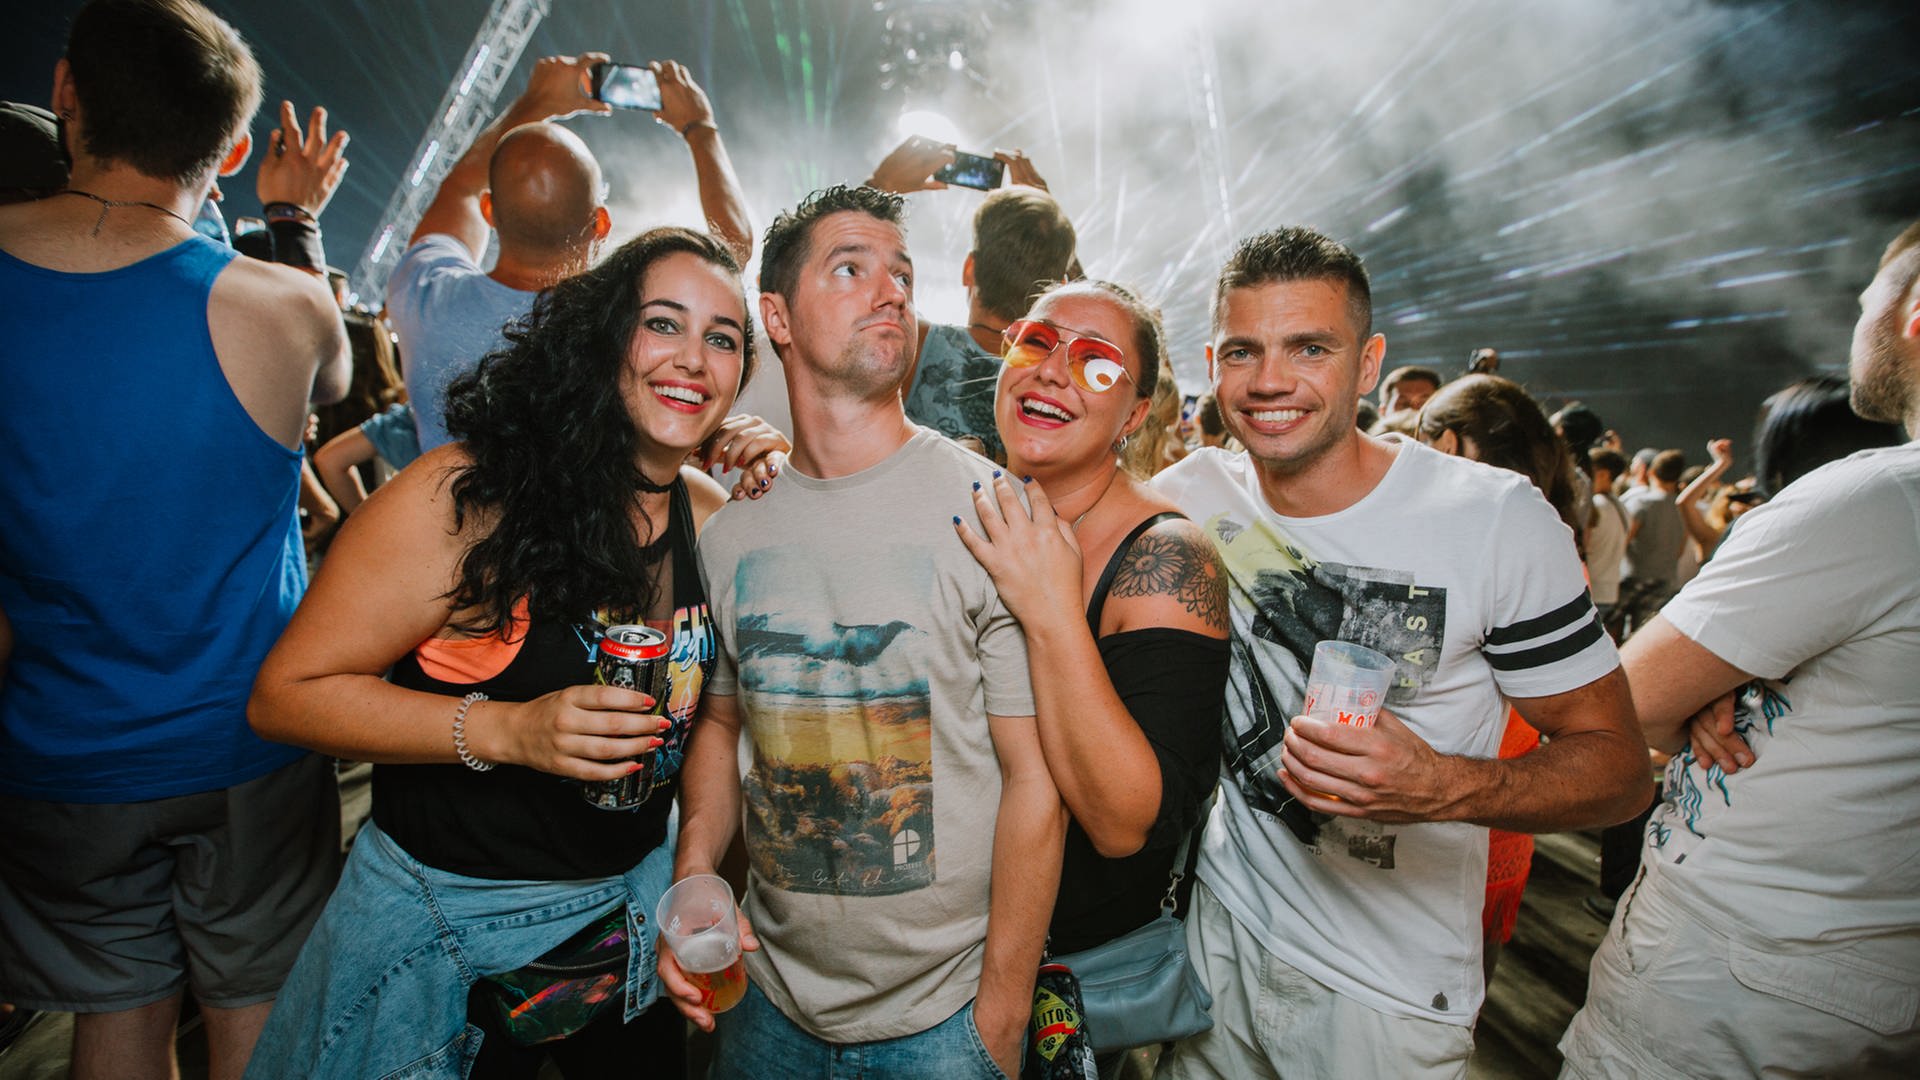 Nature One 2018 Party am Samstag (Foto: SWR DASDING, Ronny Zimmermann)